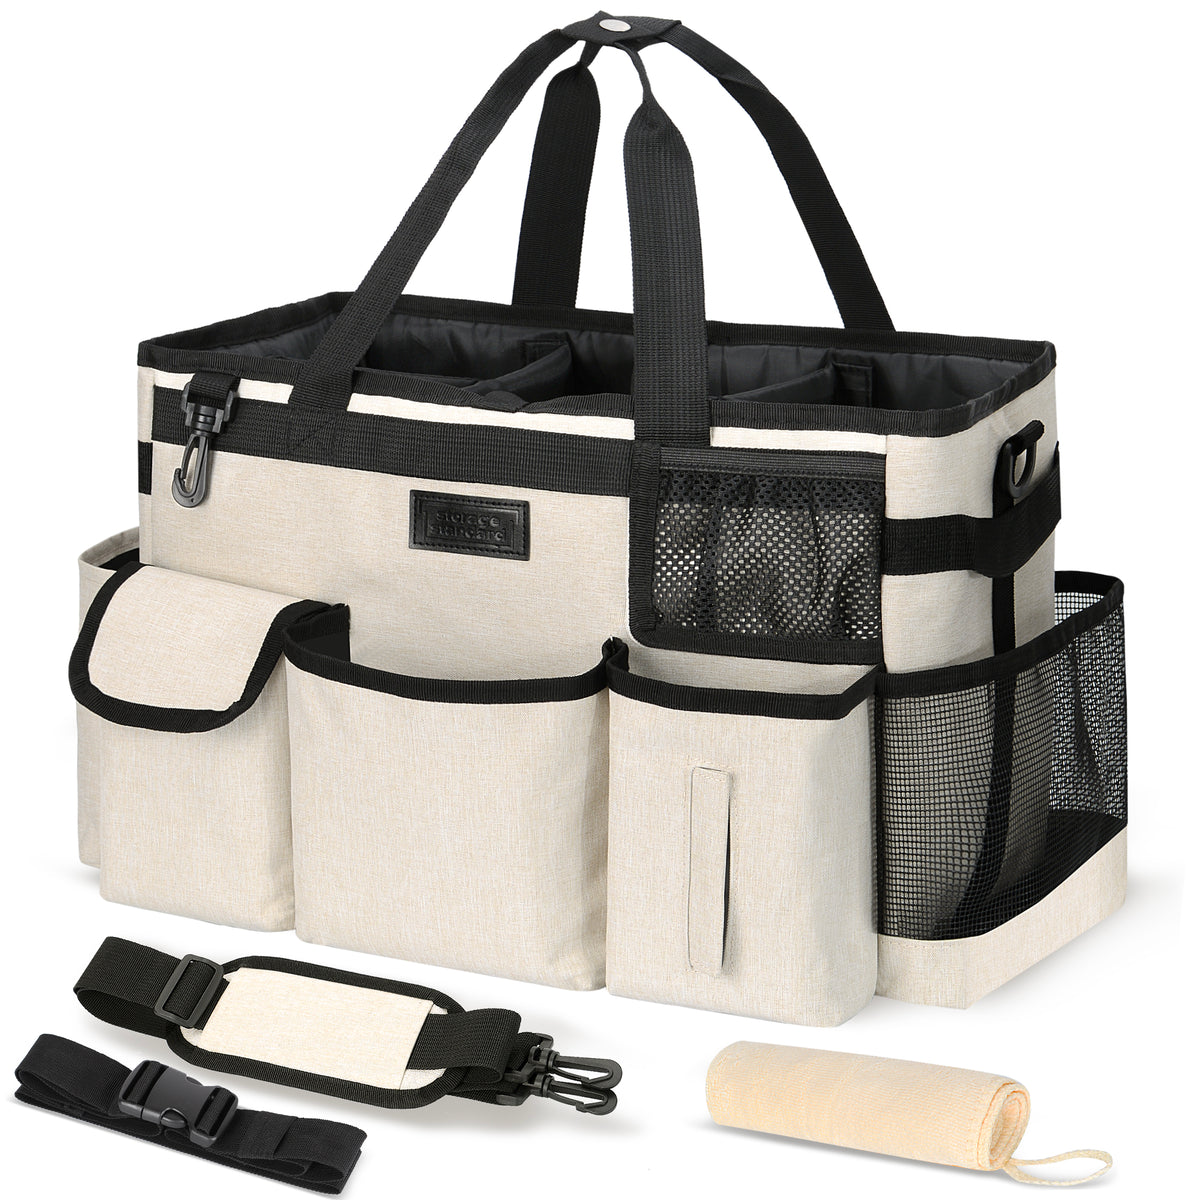 Wearable Cleaning Caddy Bag with 4 Foldable Dividers, Cleaning